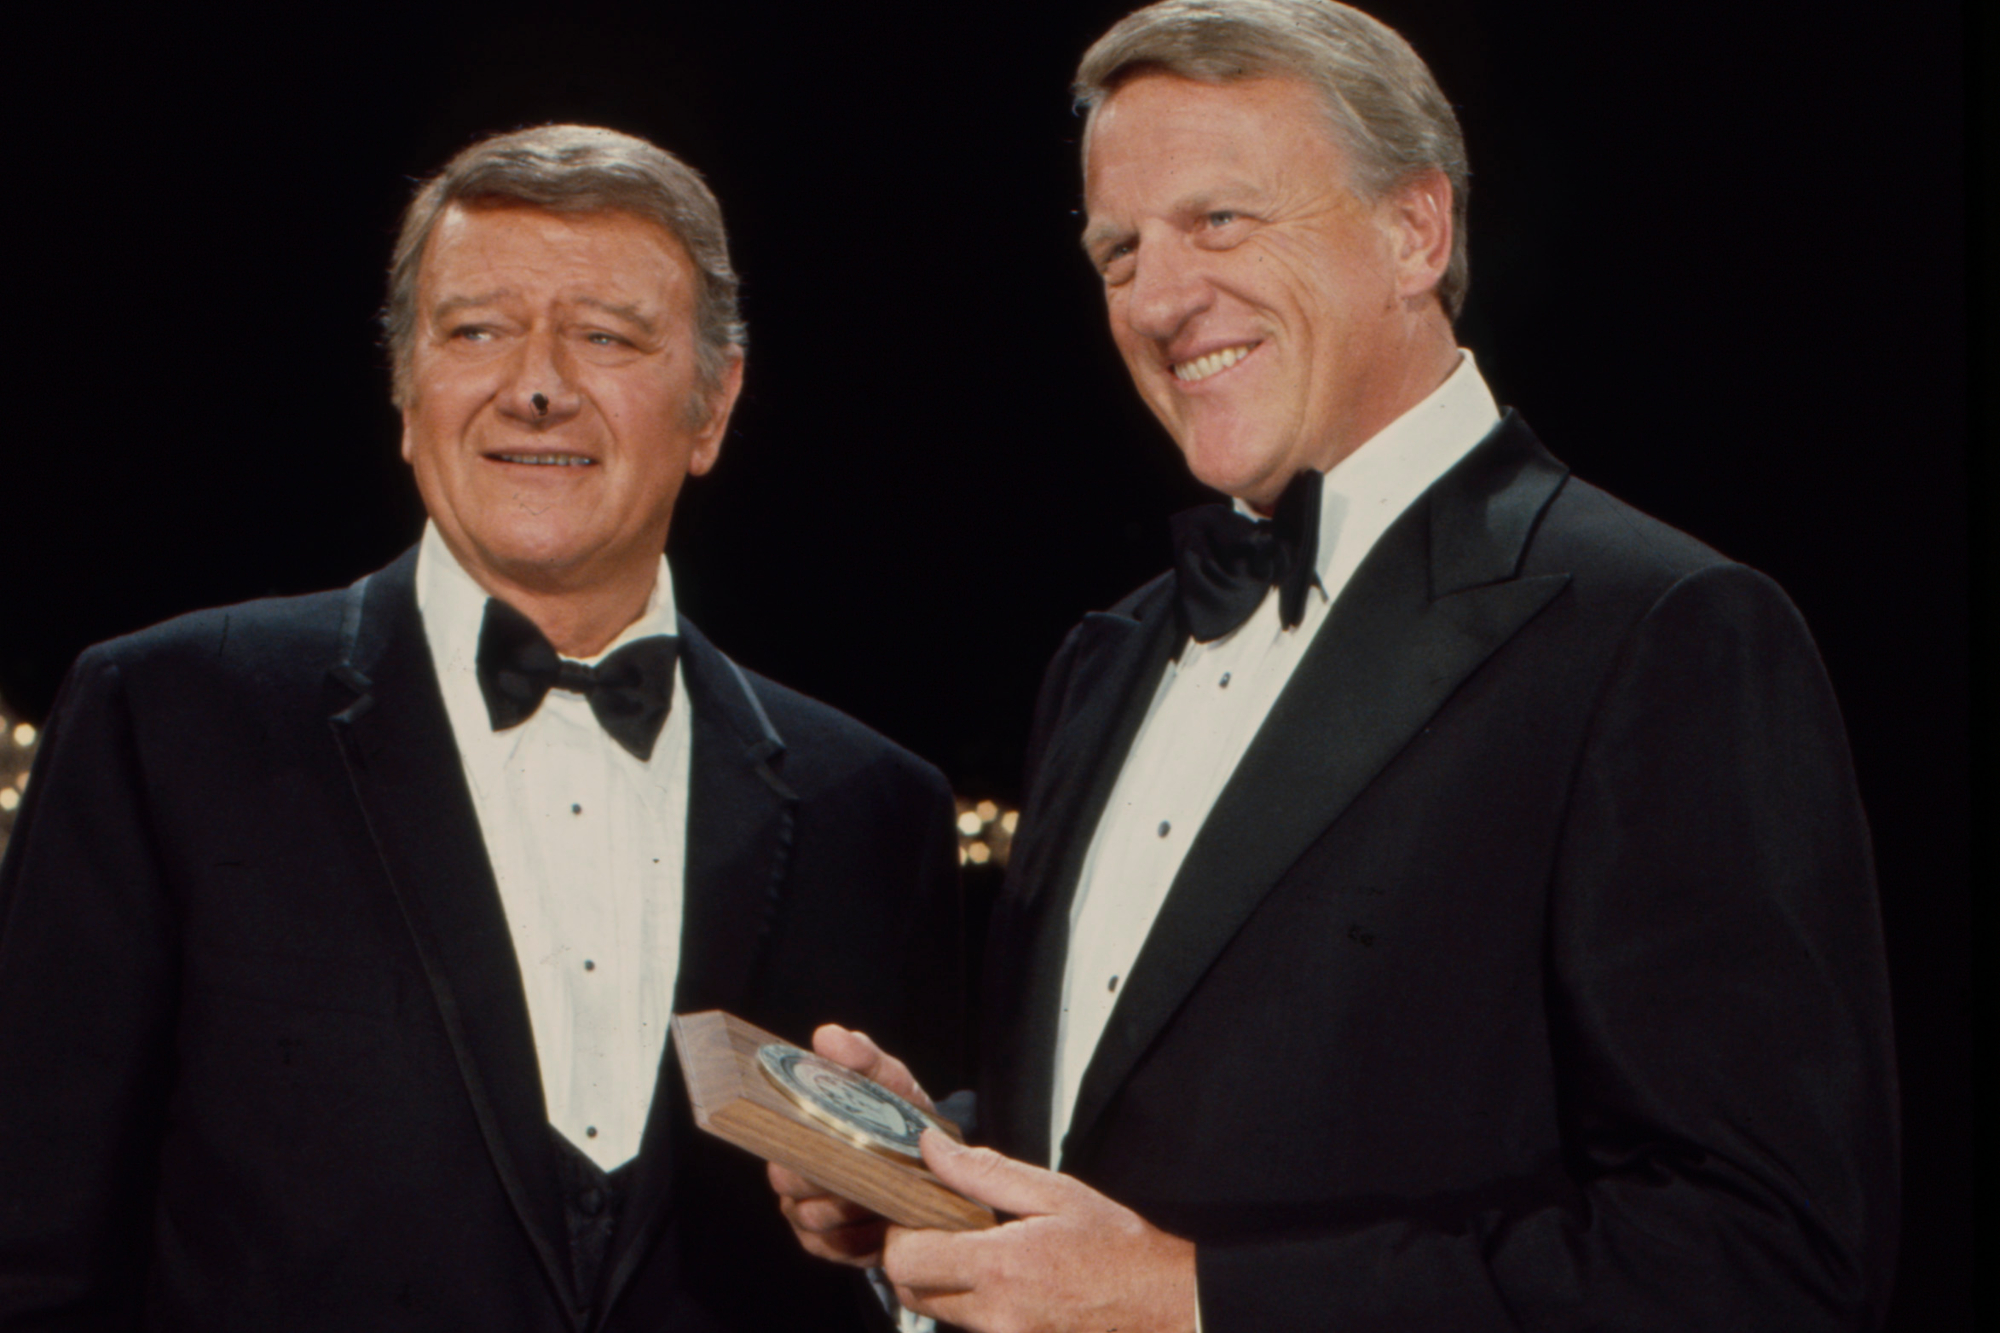 John Wayne and James Arnes.  They're smiling and wearing tuxes and Arnes holds an award.